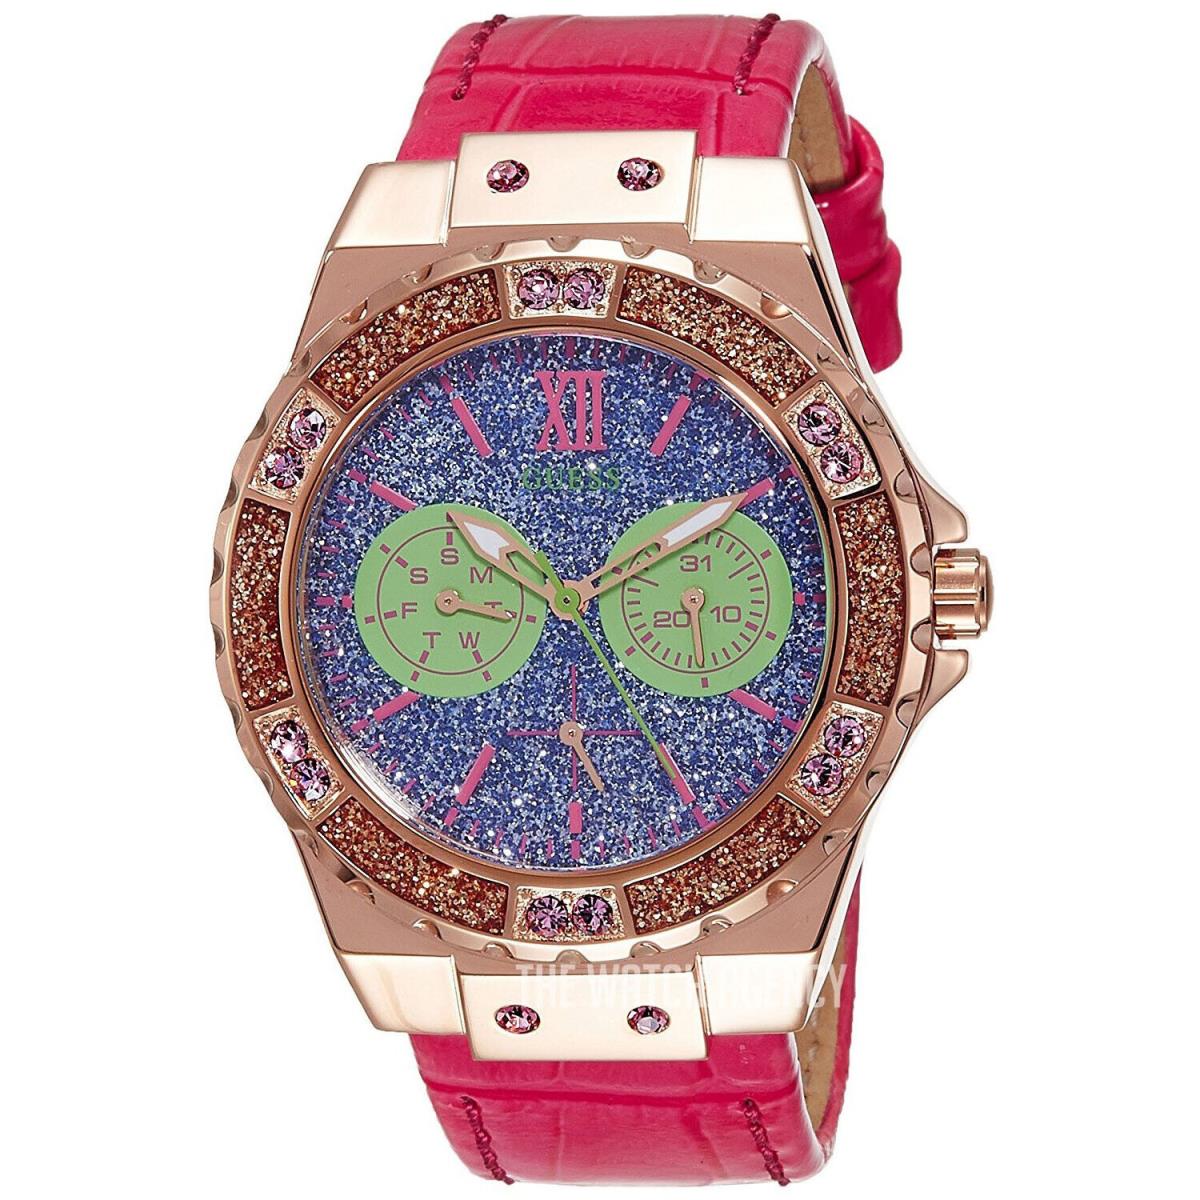 Guess Women`s Limelight Multicolor Dial Watch - W0775L4